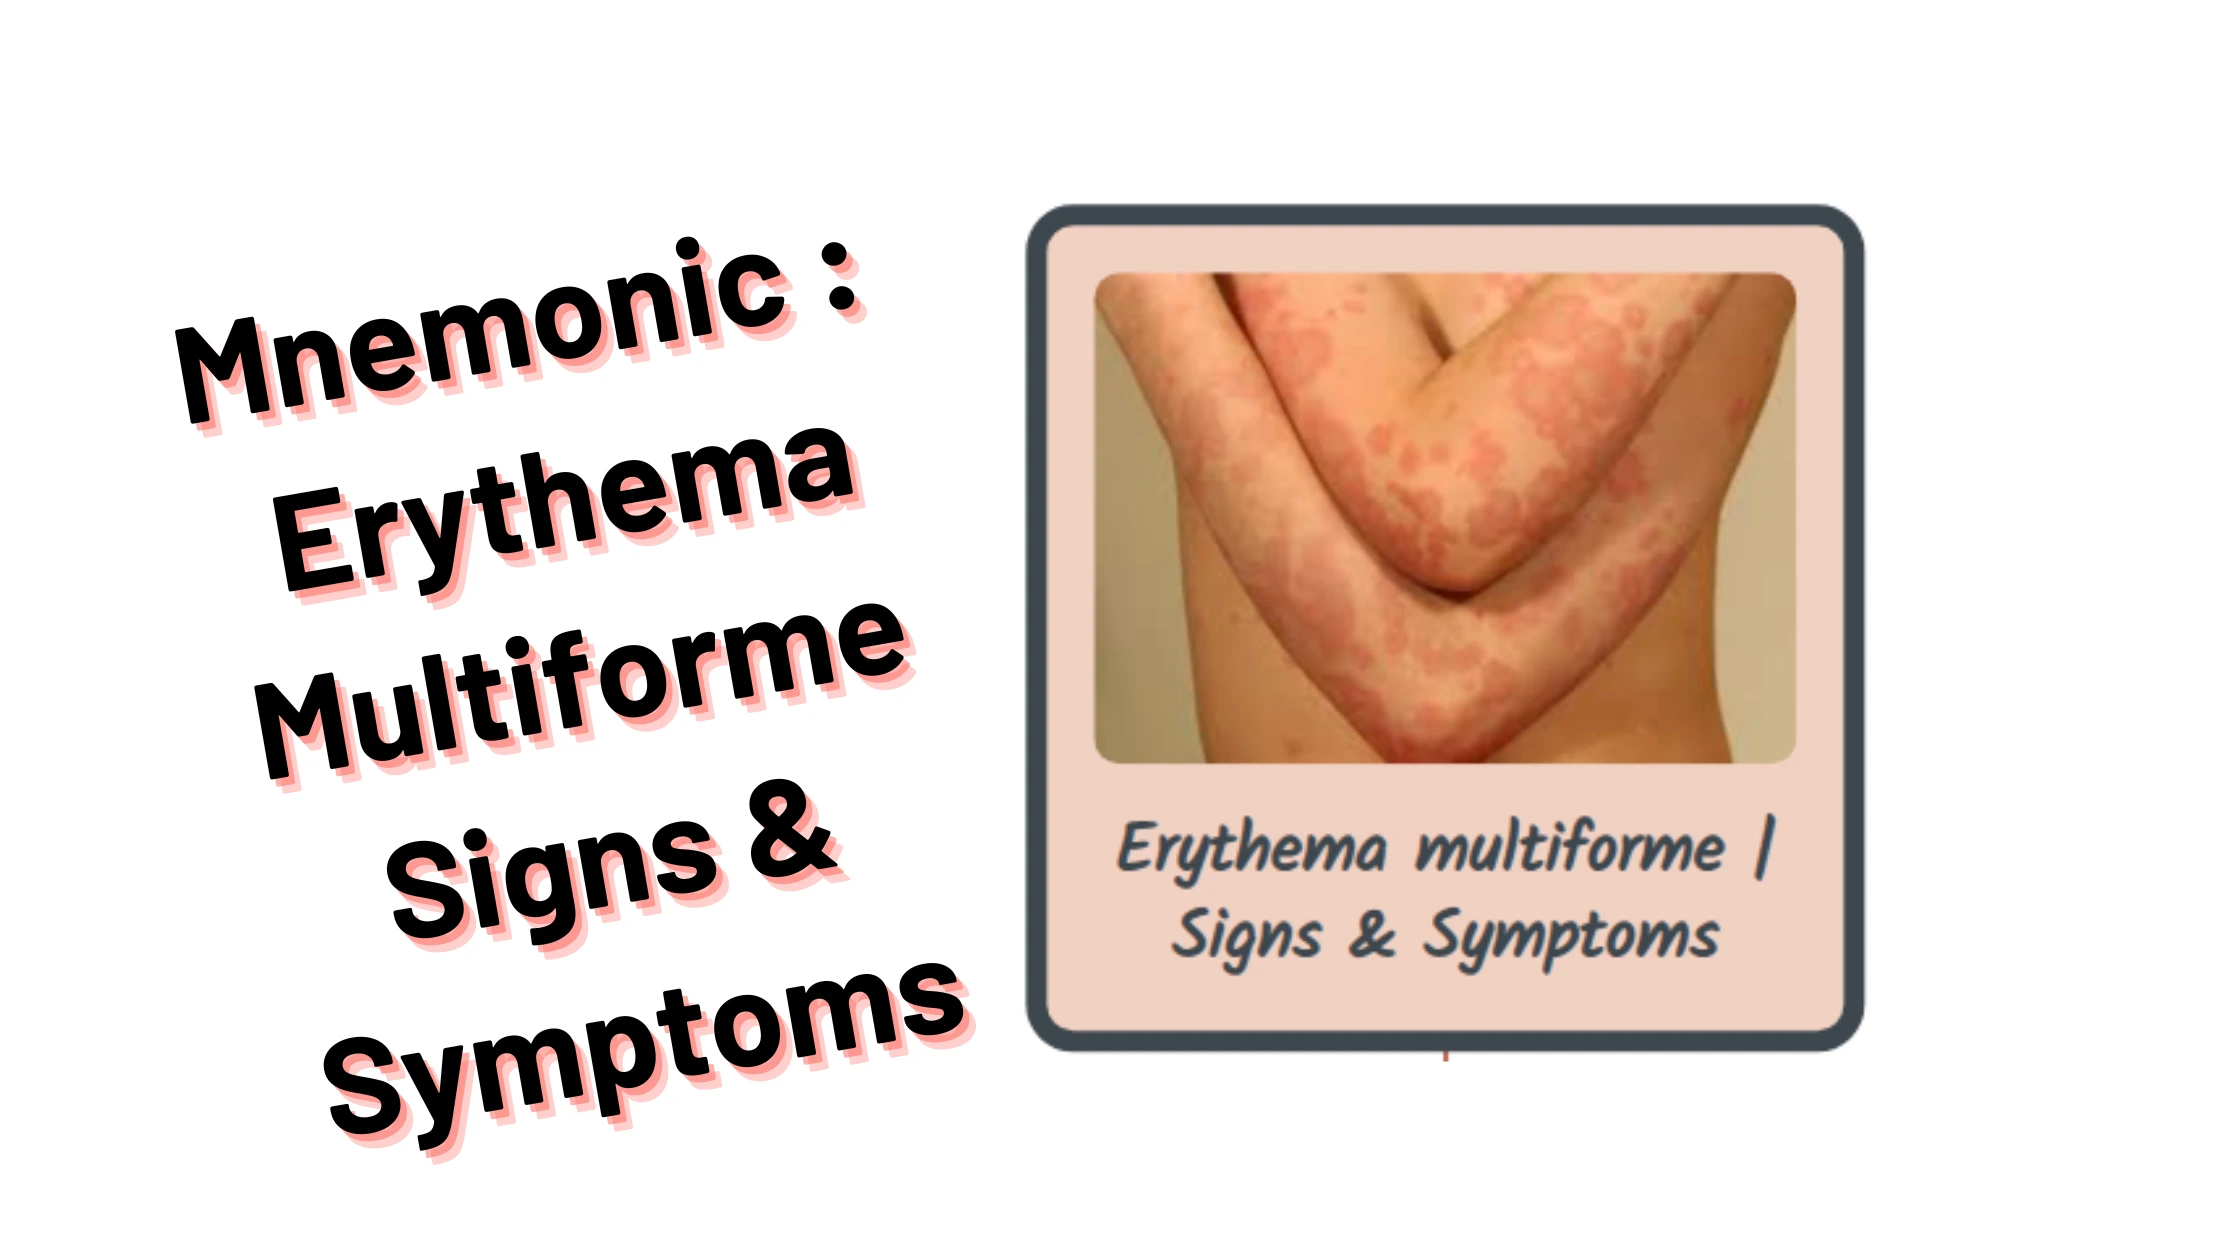 You are currently viewing [Very Cool] Mnemonic : Erythema Multiforme Signs & Symptoms